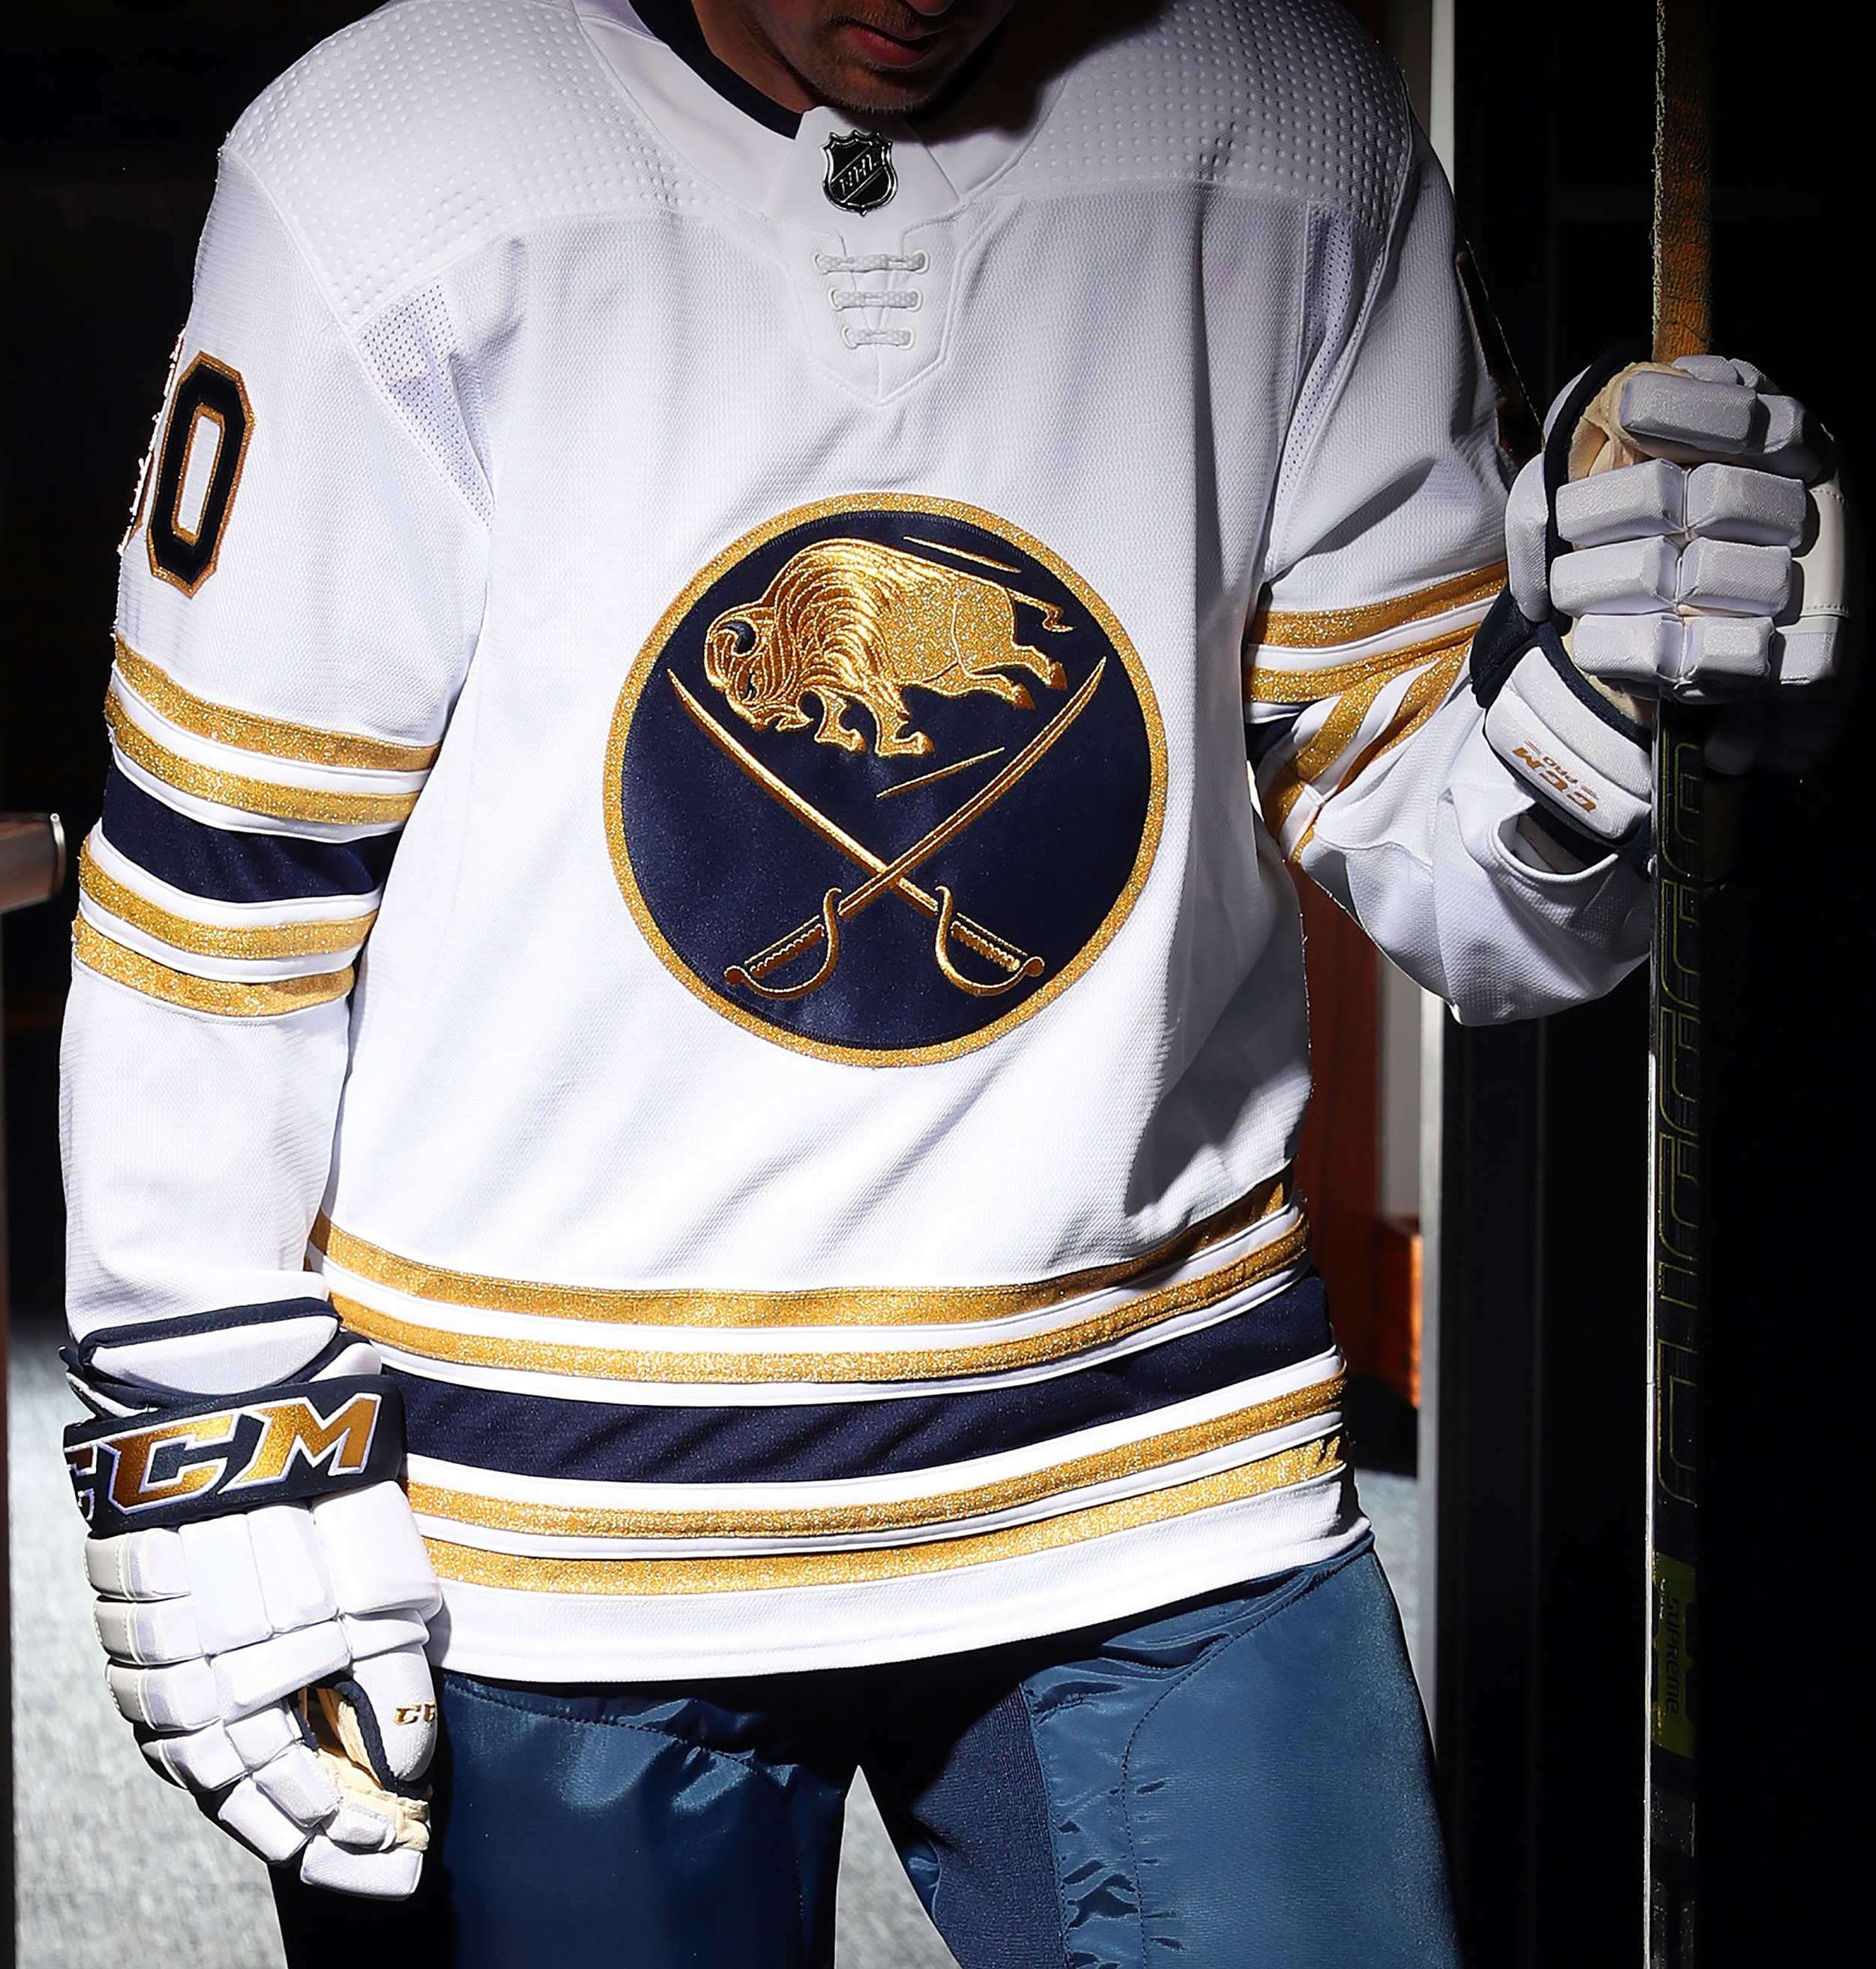 buy sabres 50th anniversary jersey